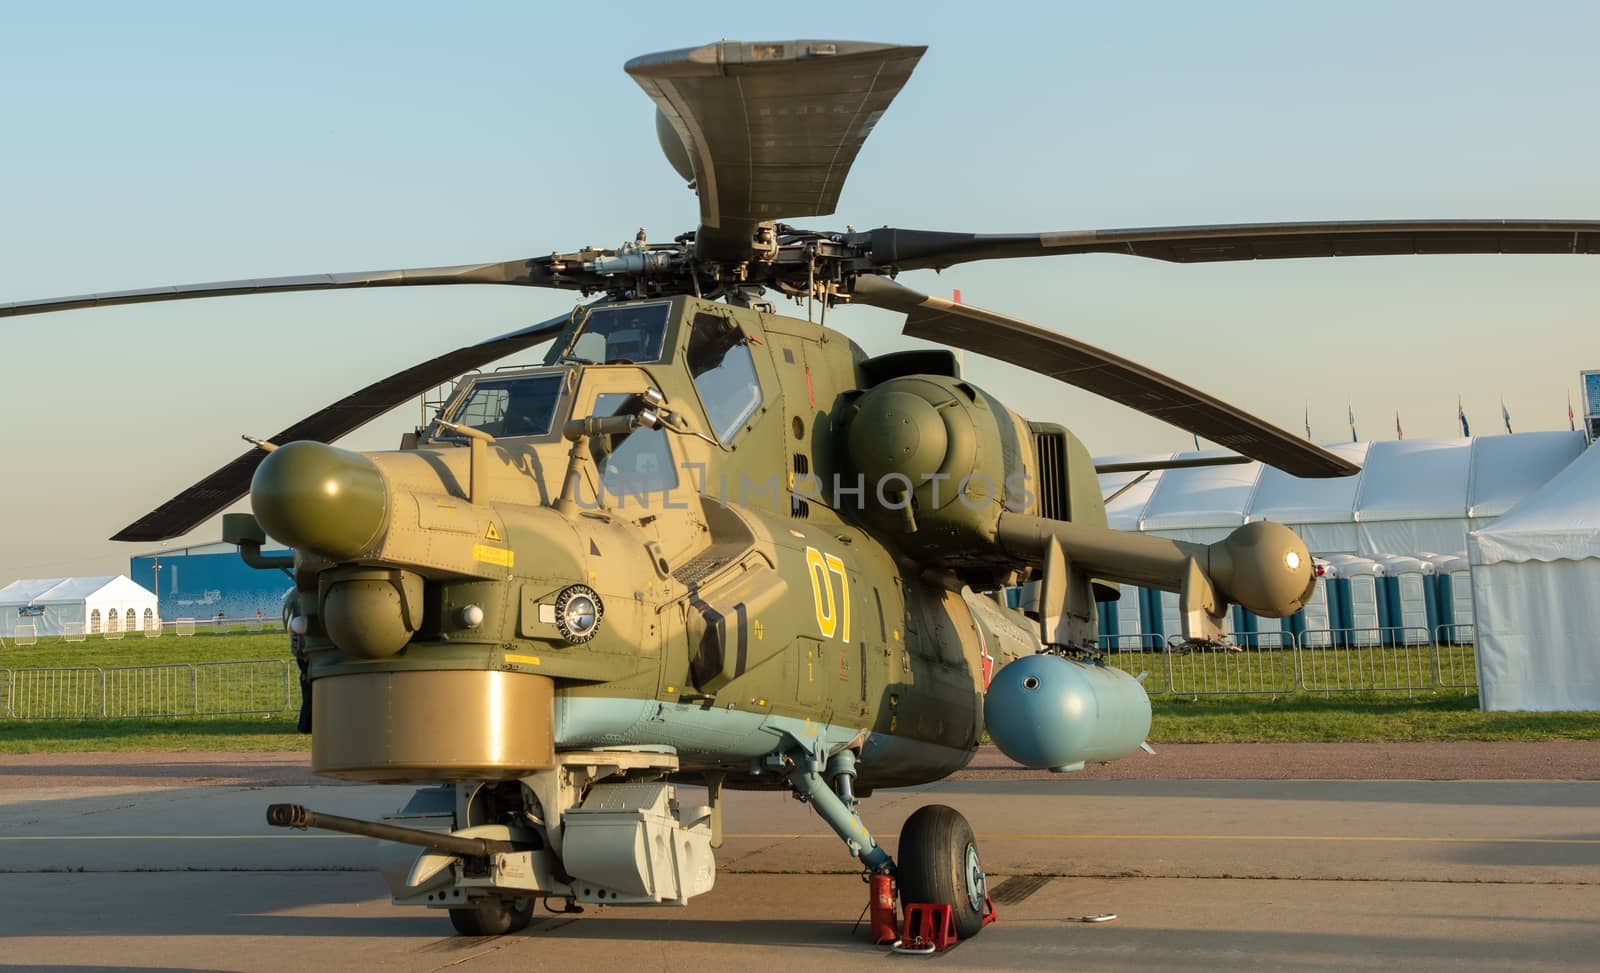 August 30, 2019. Zhukovsky, Russia. Russian attack helicopter Mil Mi-28 at the International Aviation and Space Salon MAKS 2019.